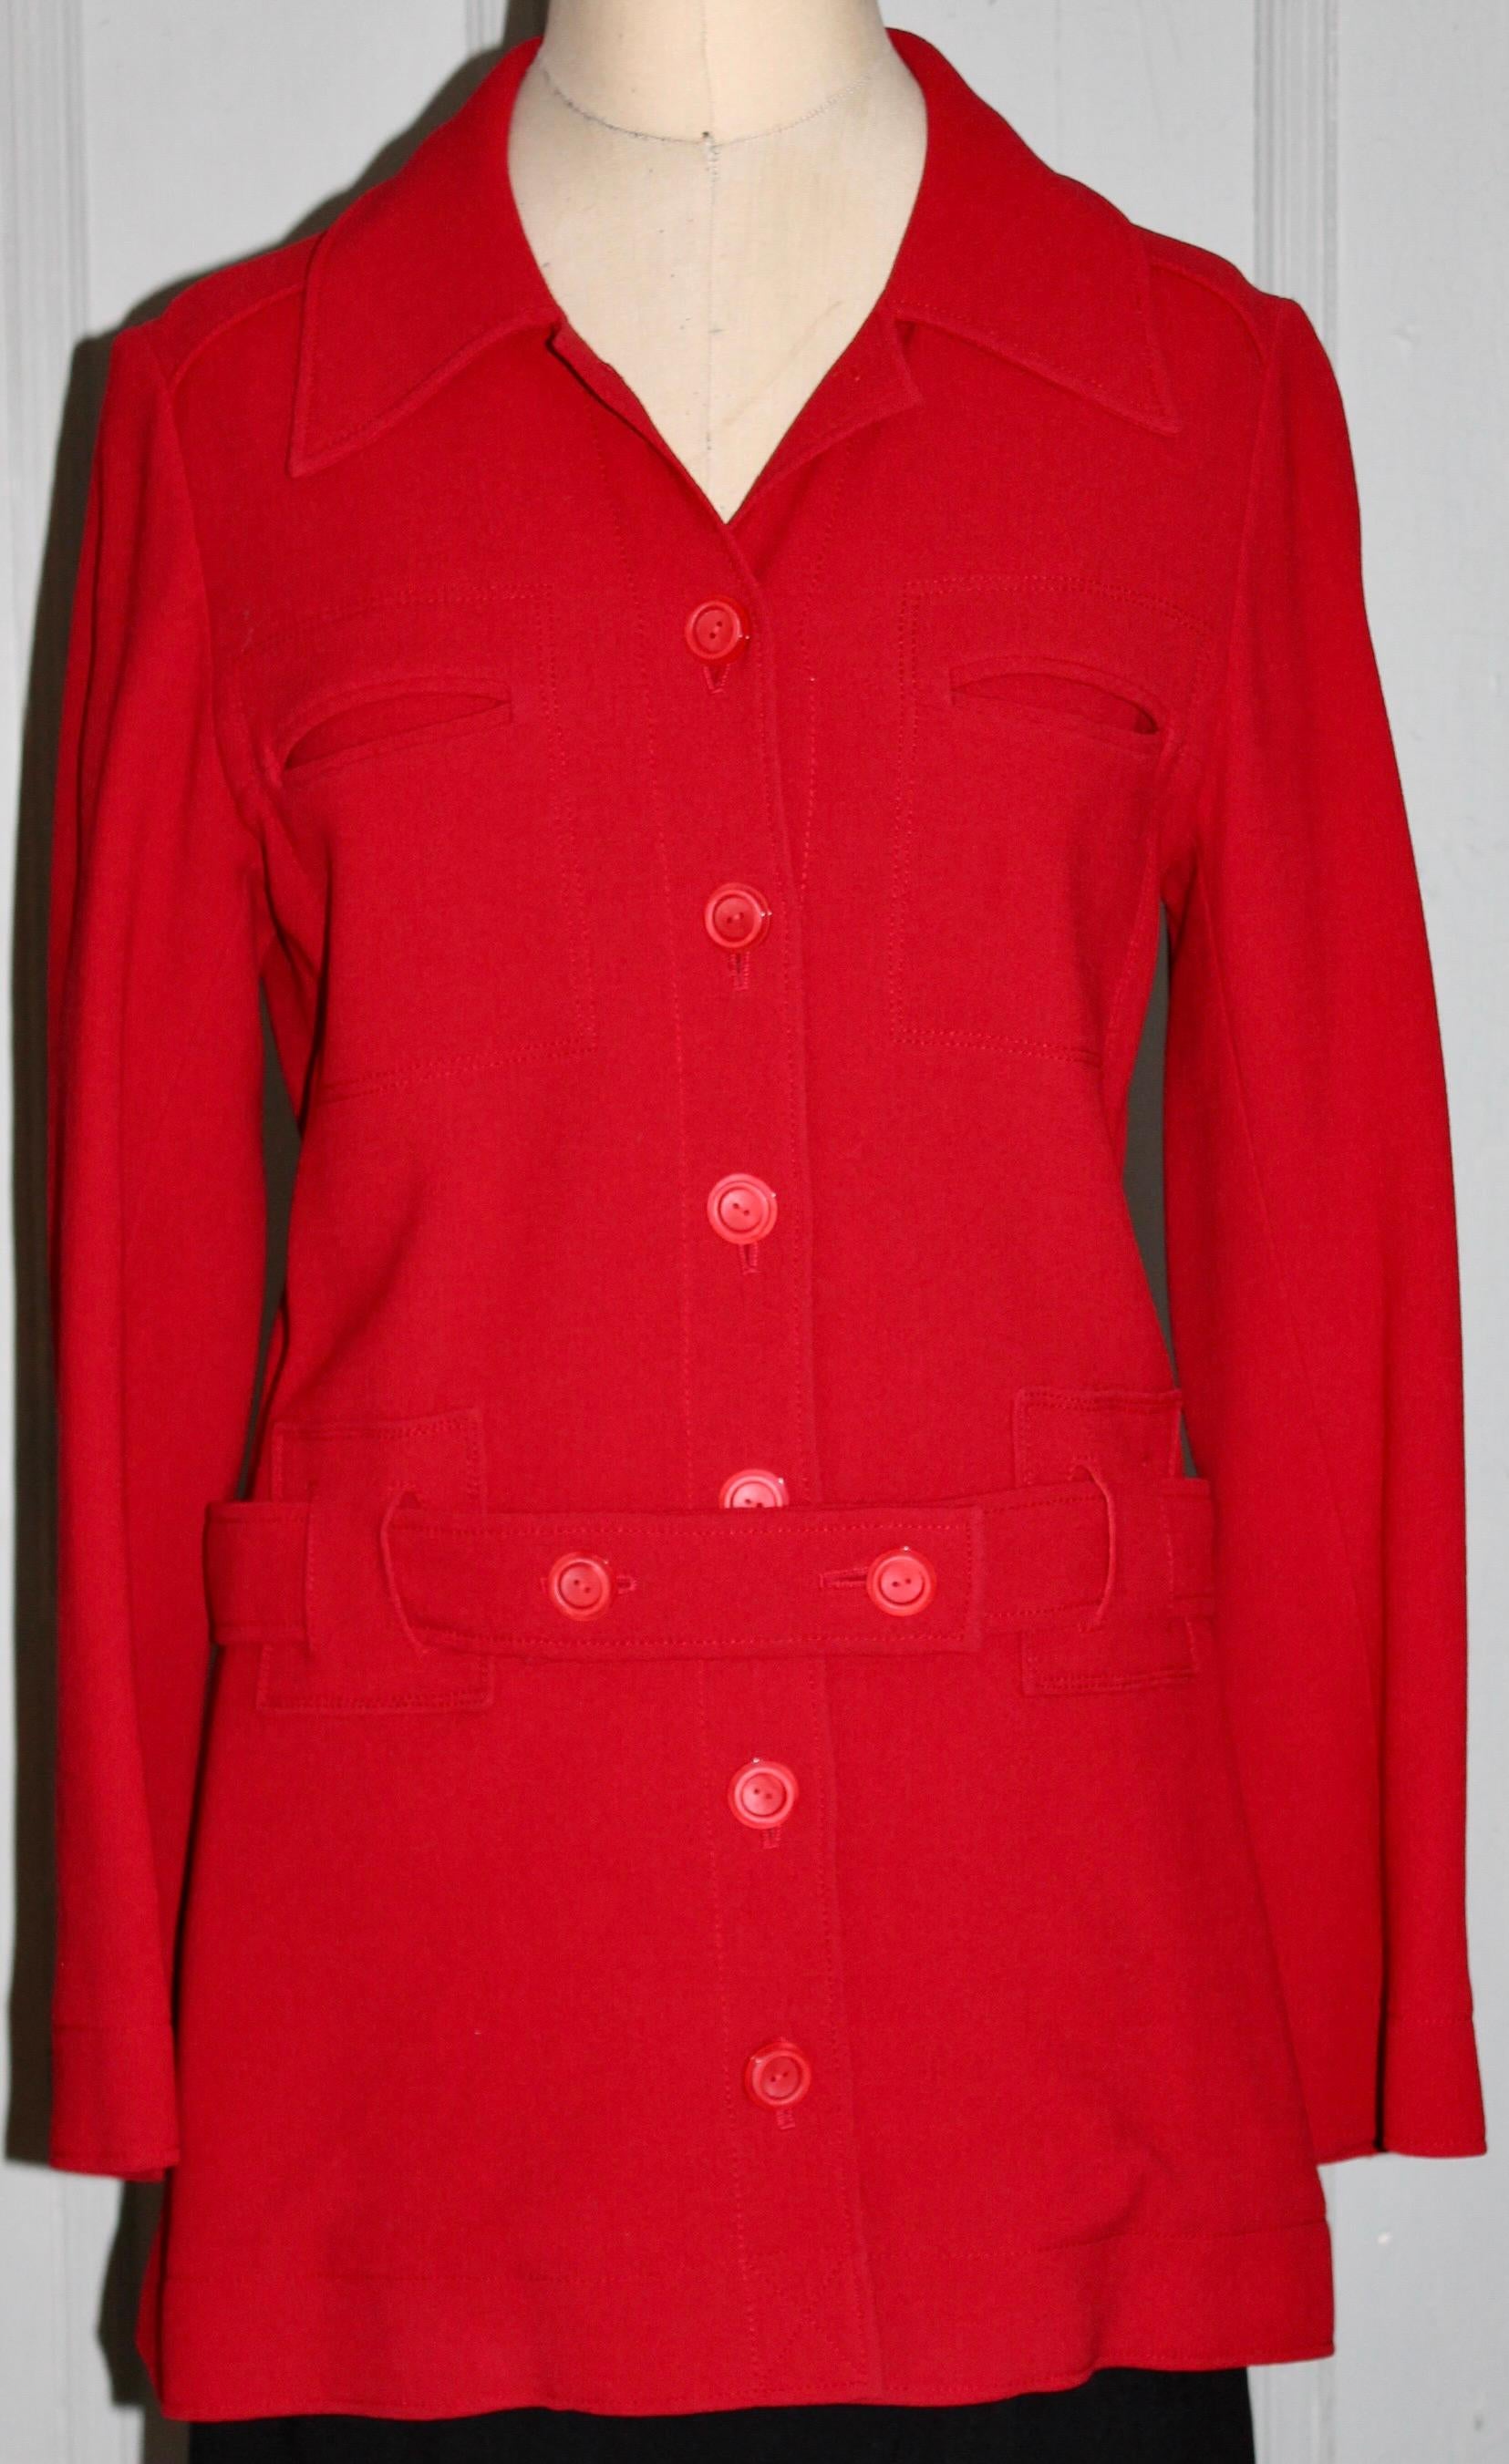 A Henri Bendel 'Limited Edition' classic red wool jacket buttons and belt in front.  No sizing label, approximately EU 40-42